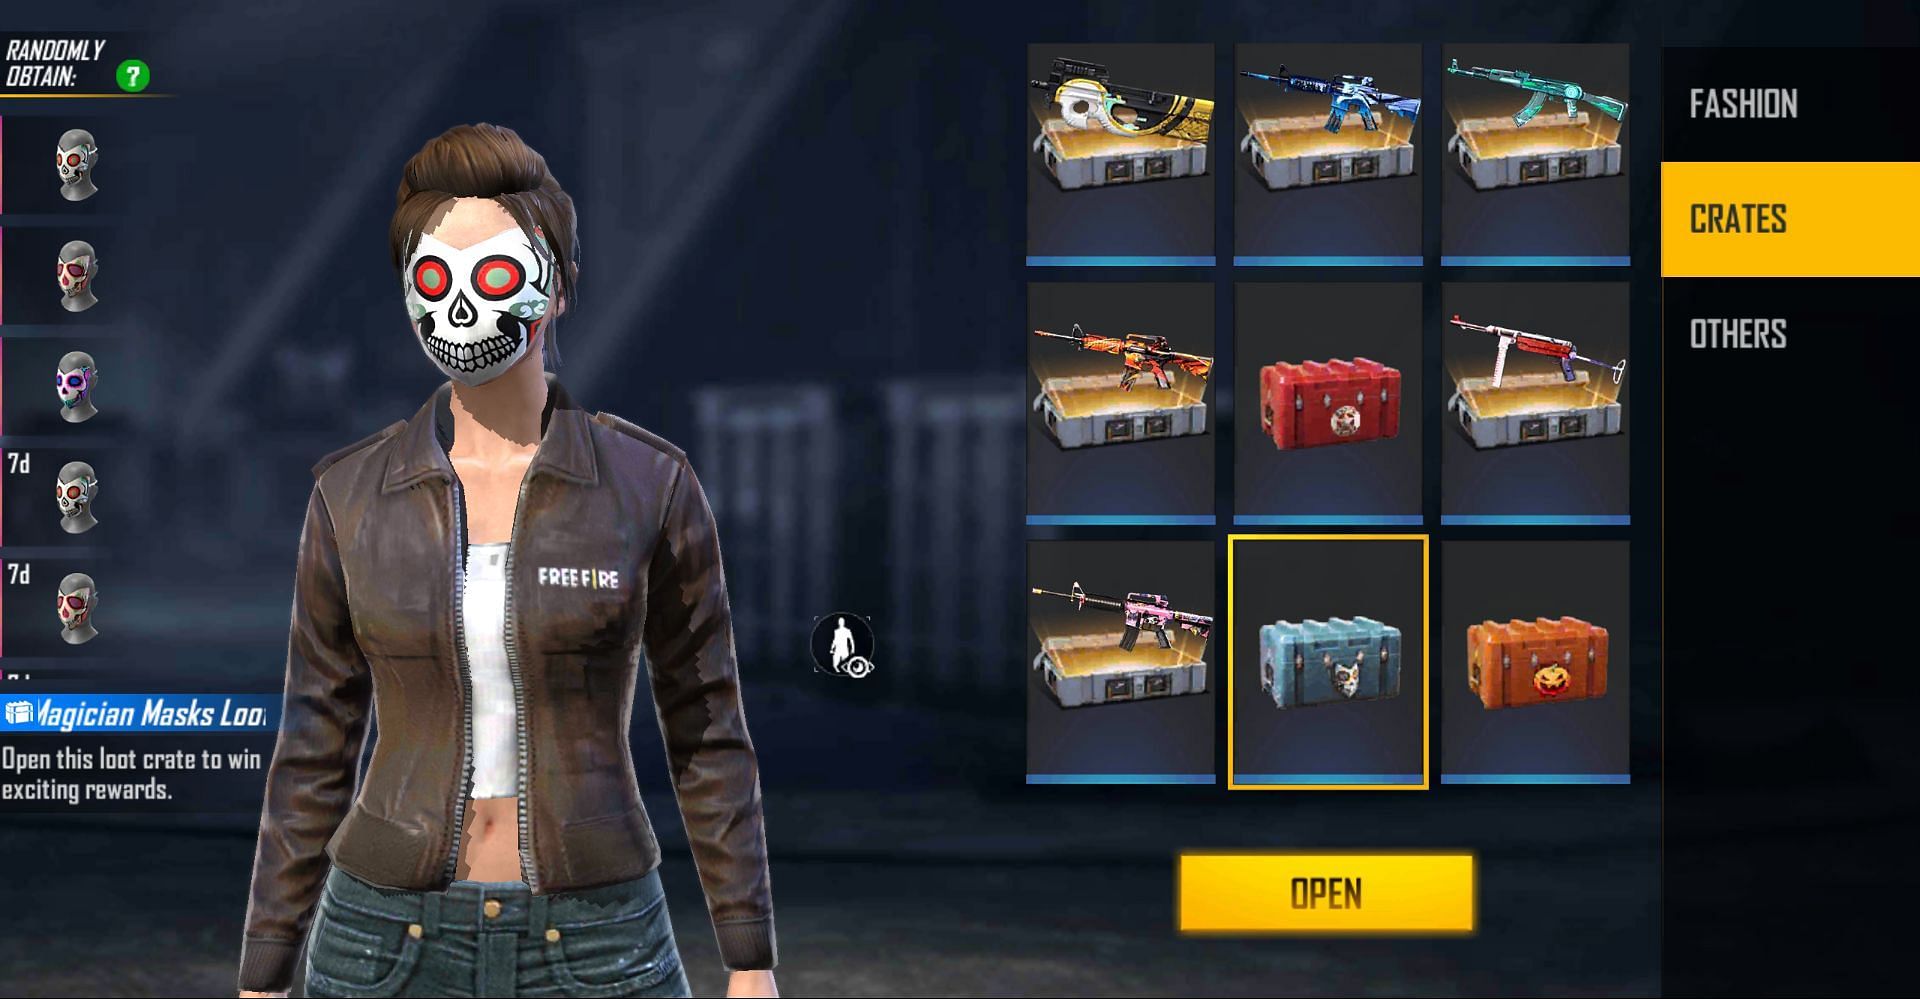 The Skeleton Magician Mask Loot Crate can be opened for a reward (Image via Free Fire)